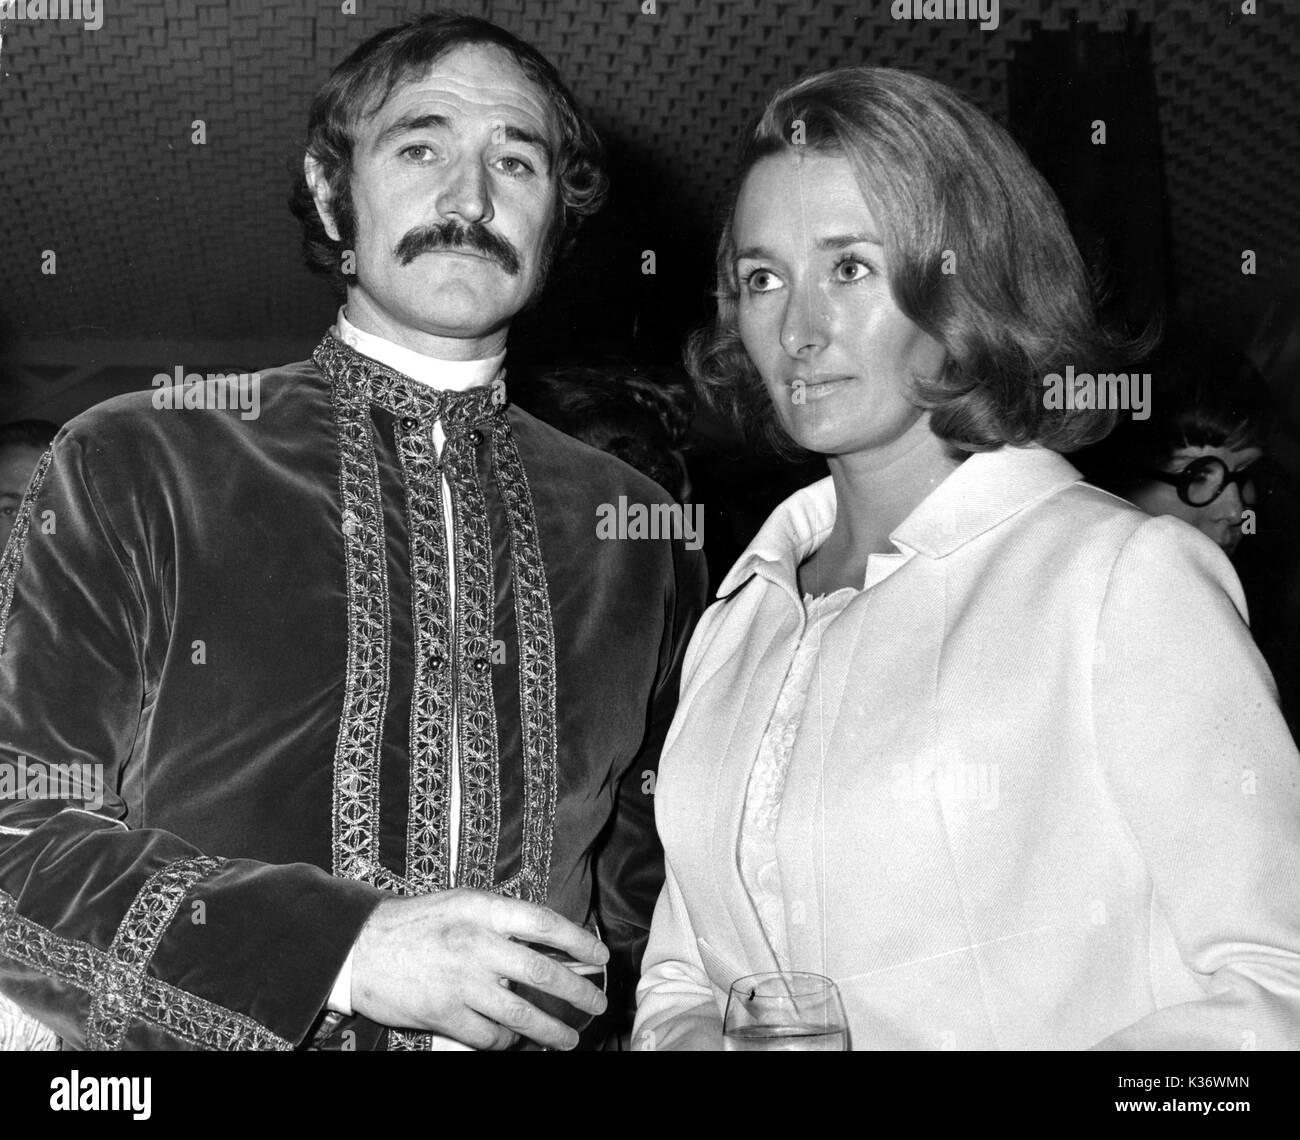 RICHARD HARRIS AND MOIRA LLOYD AT THE PREMIERE OF THE FILM CAMELOT IN 1967 Stock Photo